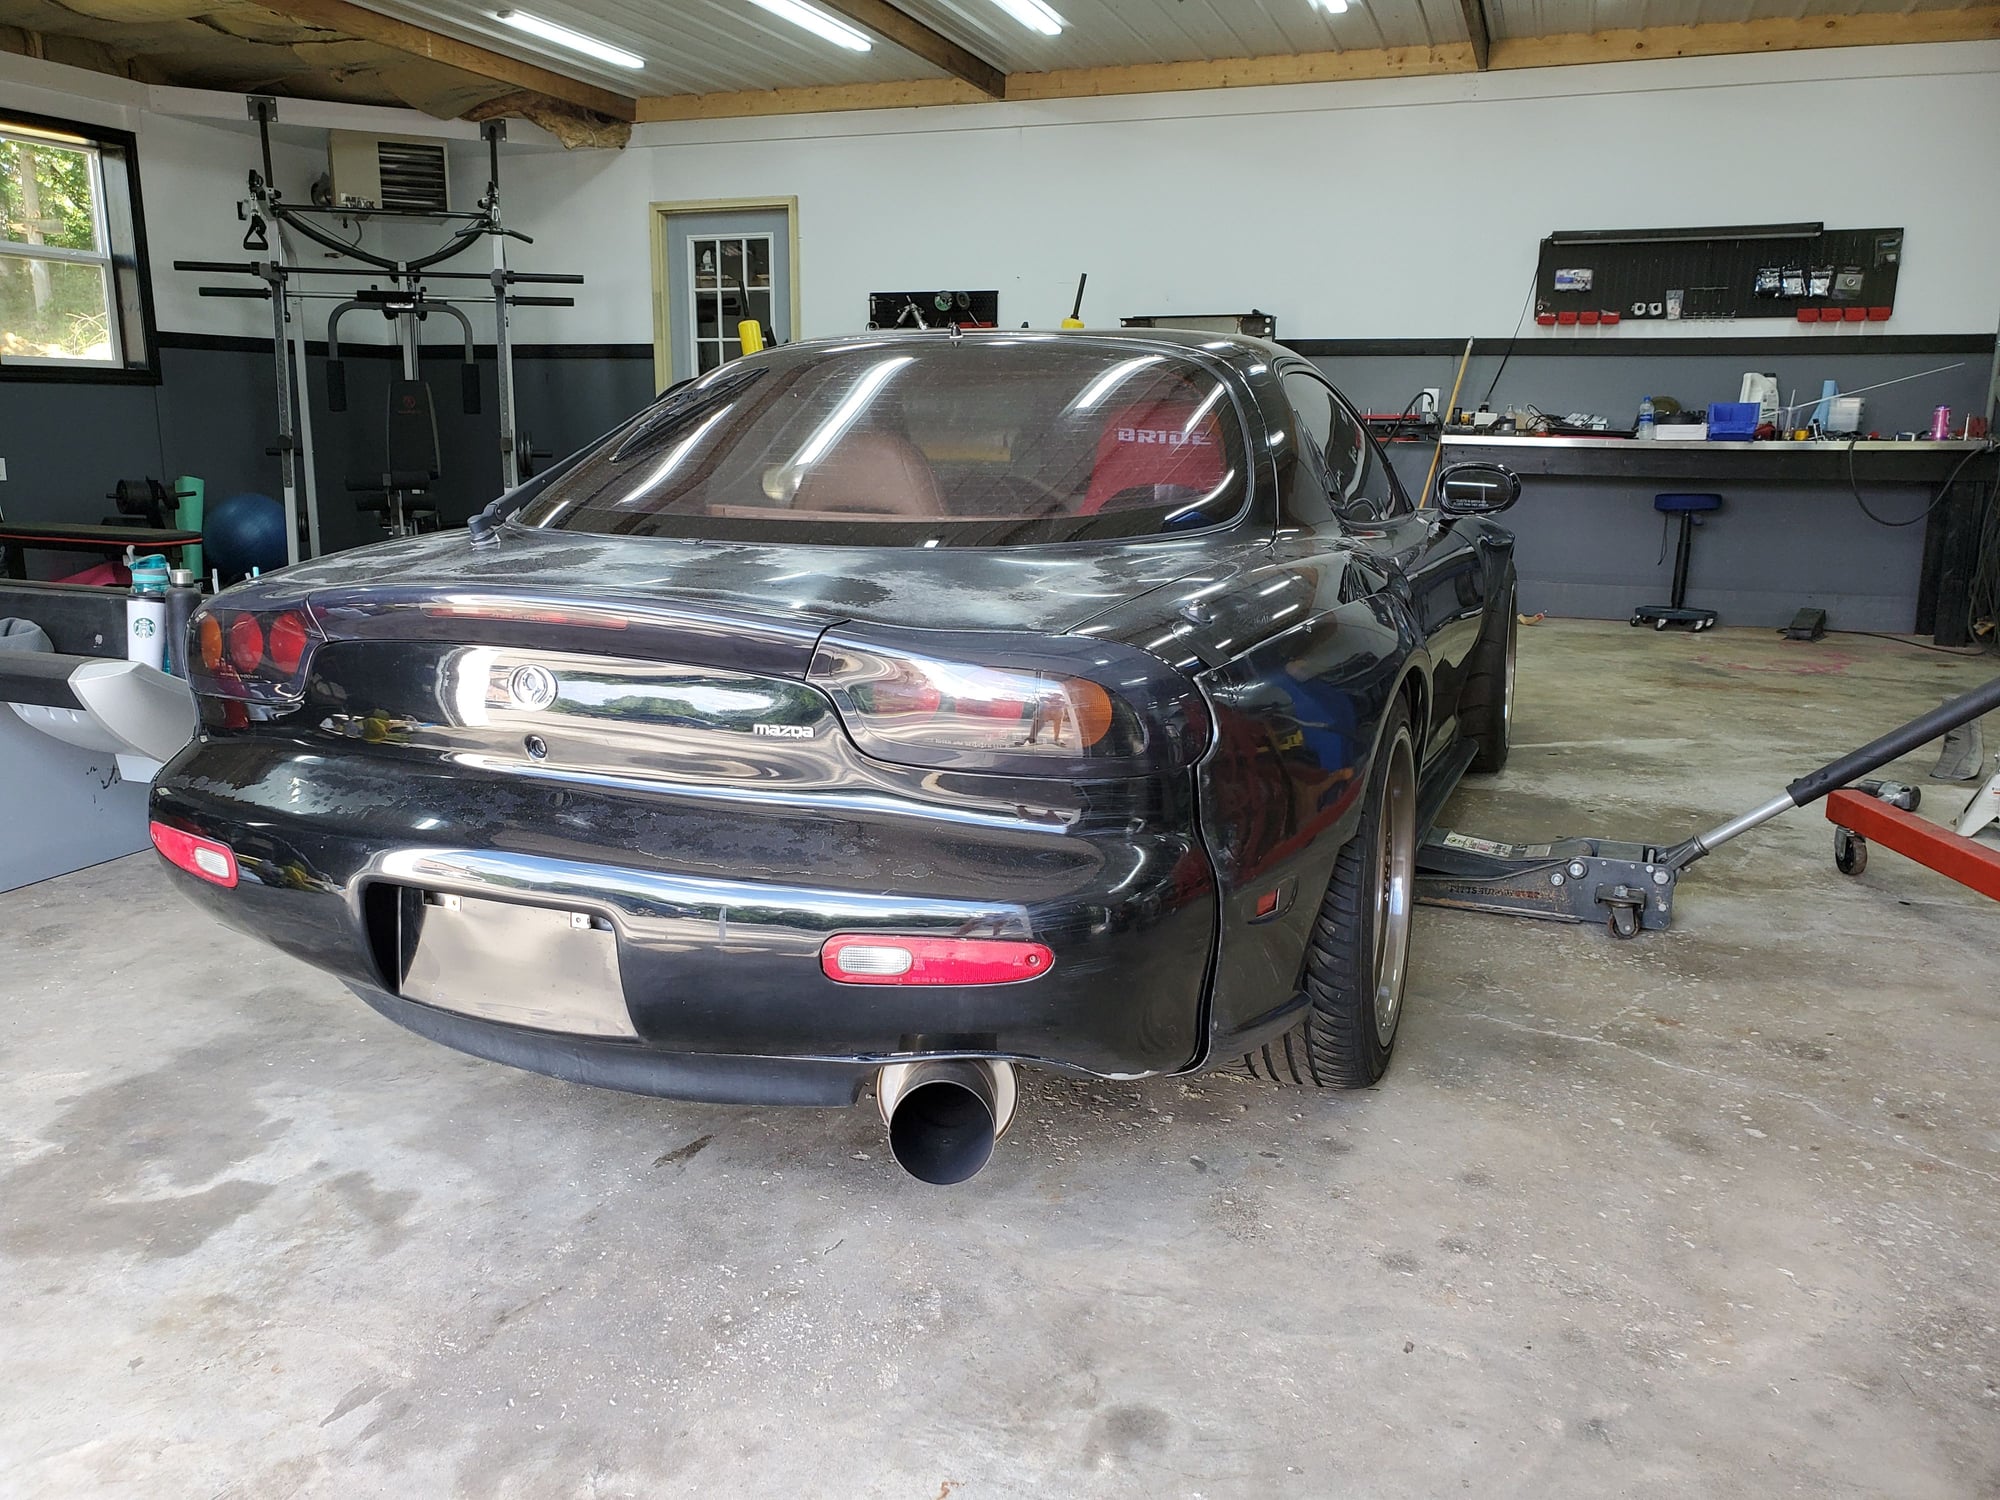 Exterior Body Parts - Shine Auto Feed style bumper, front fenders, rear over fenders and carbon fiber side - New - 1993 to 1994 Mazda RX-7 - Louisville, KY 40118, United States